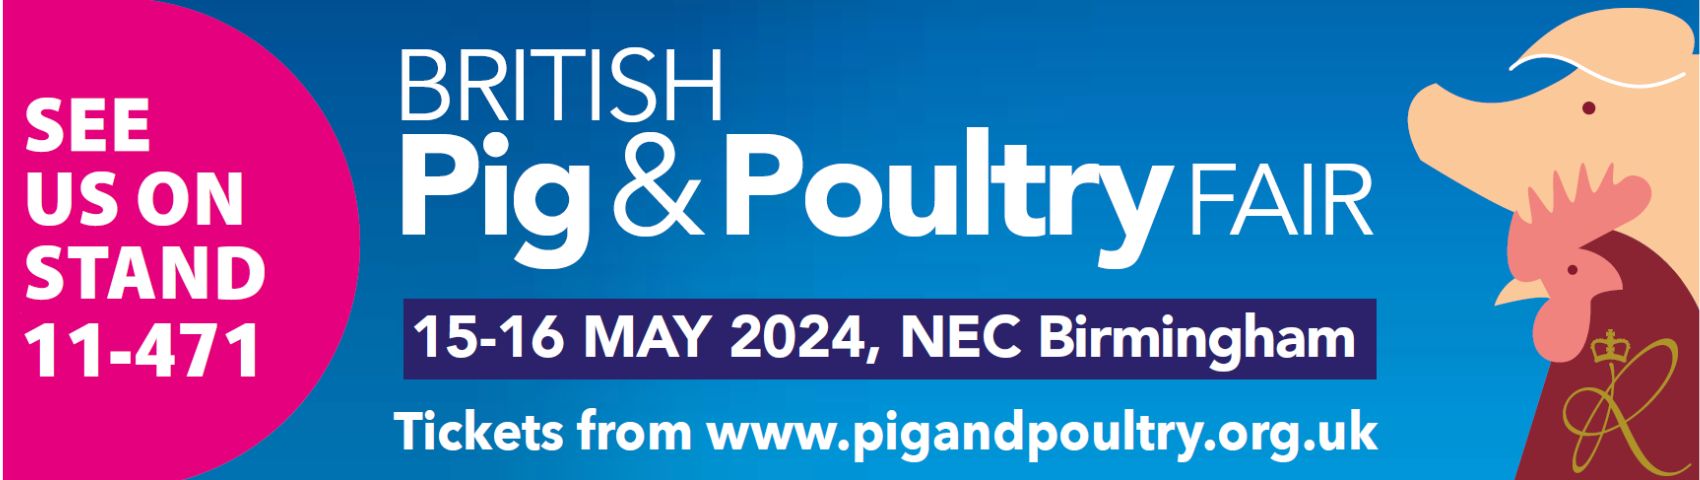 Pig and Poultry fair logo with call to action to see AHDB on stand 11-471